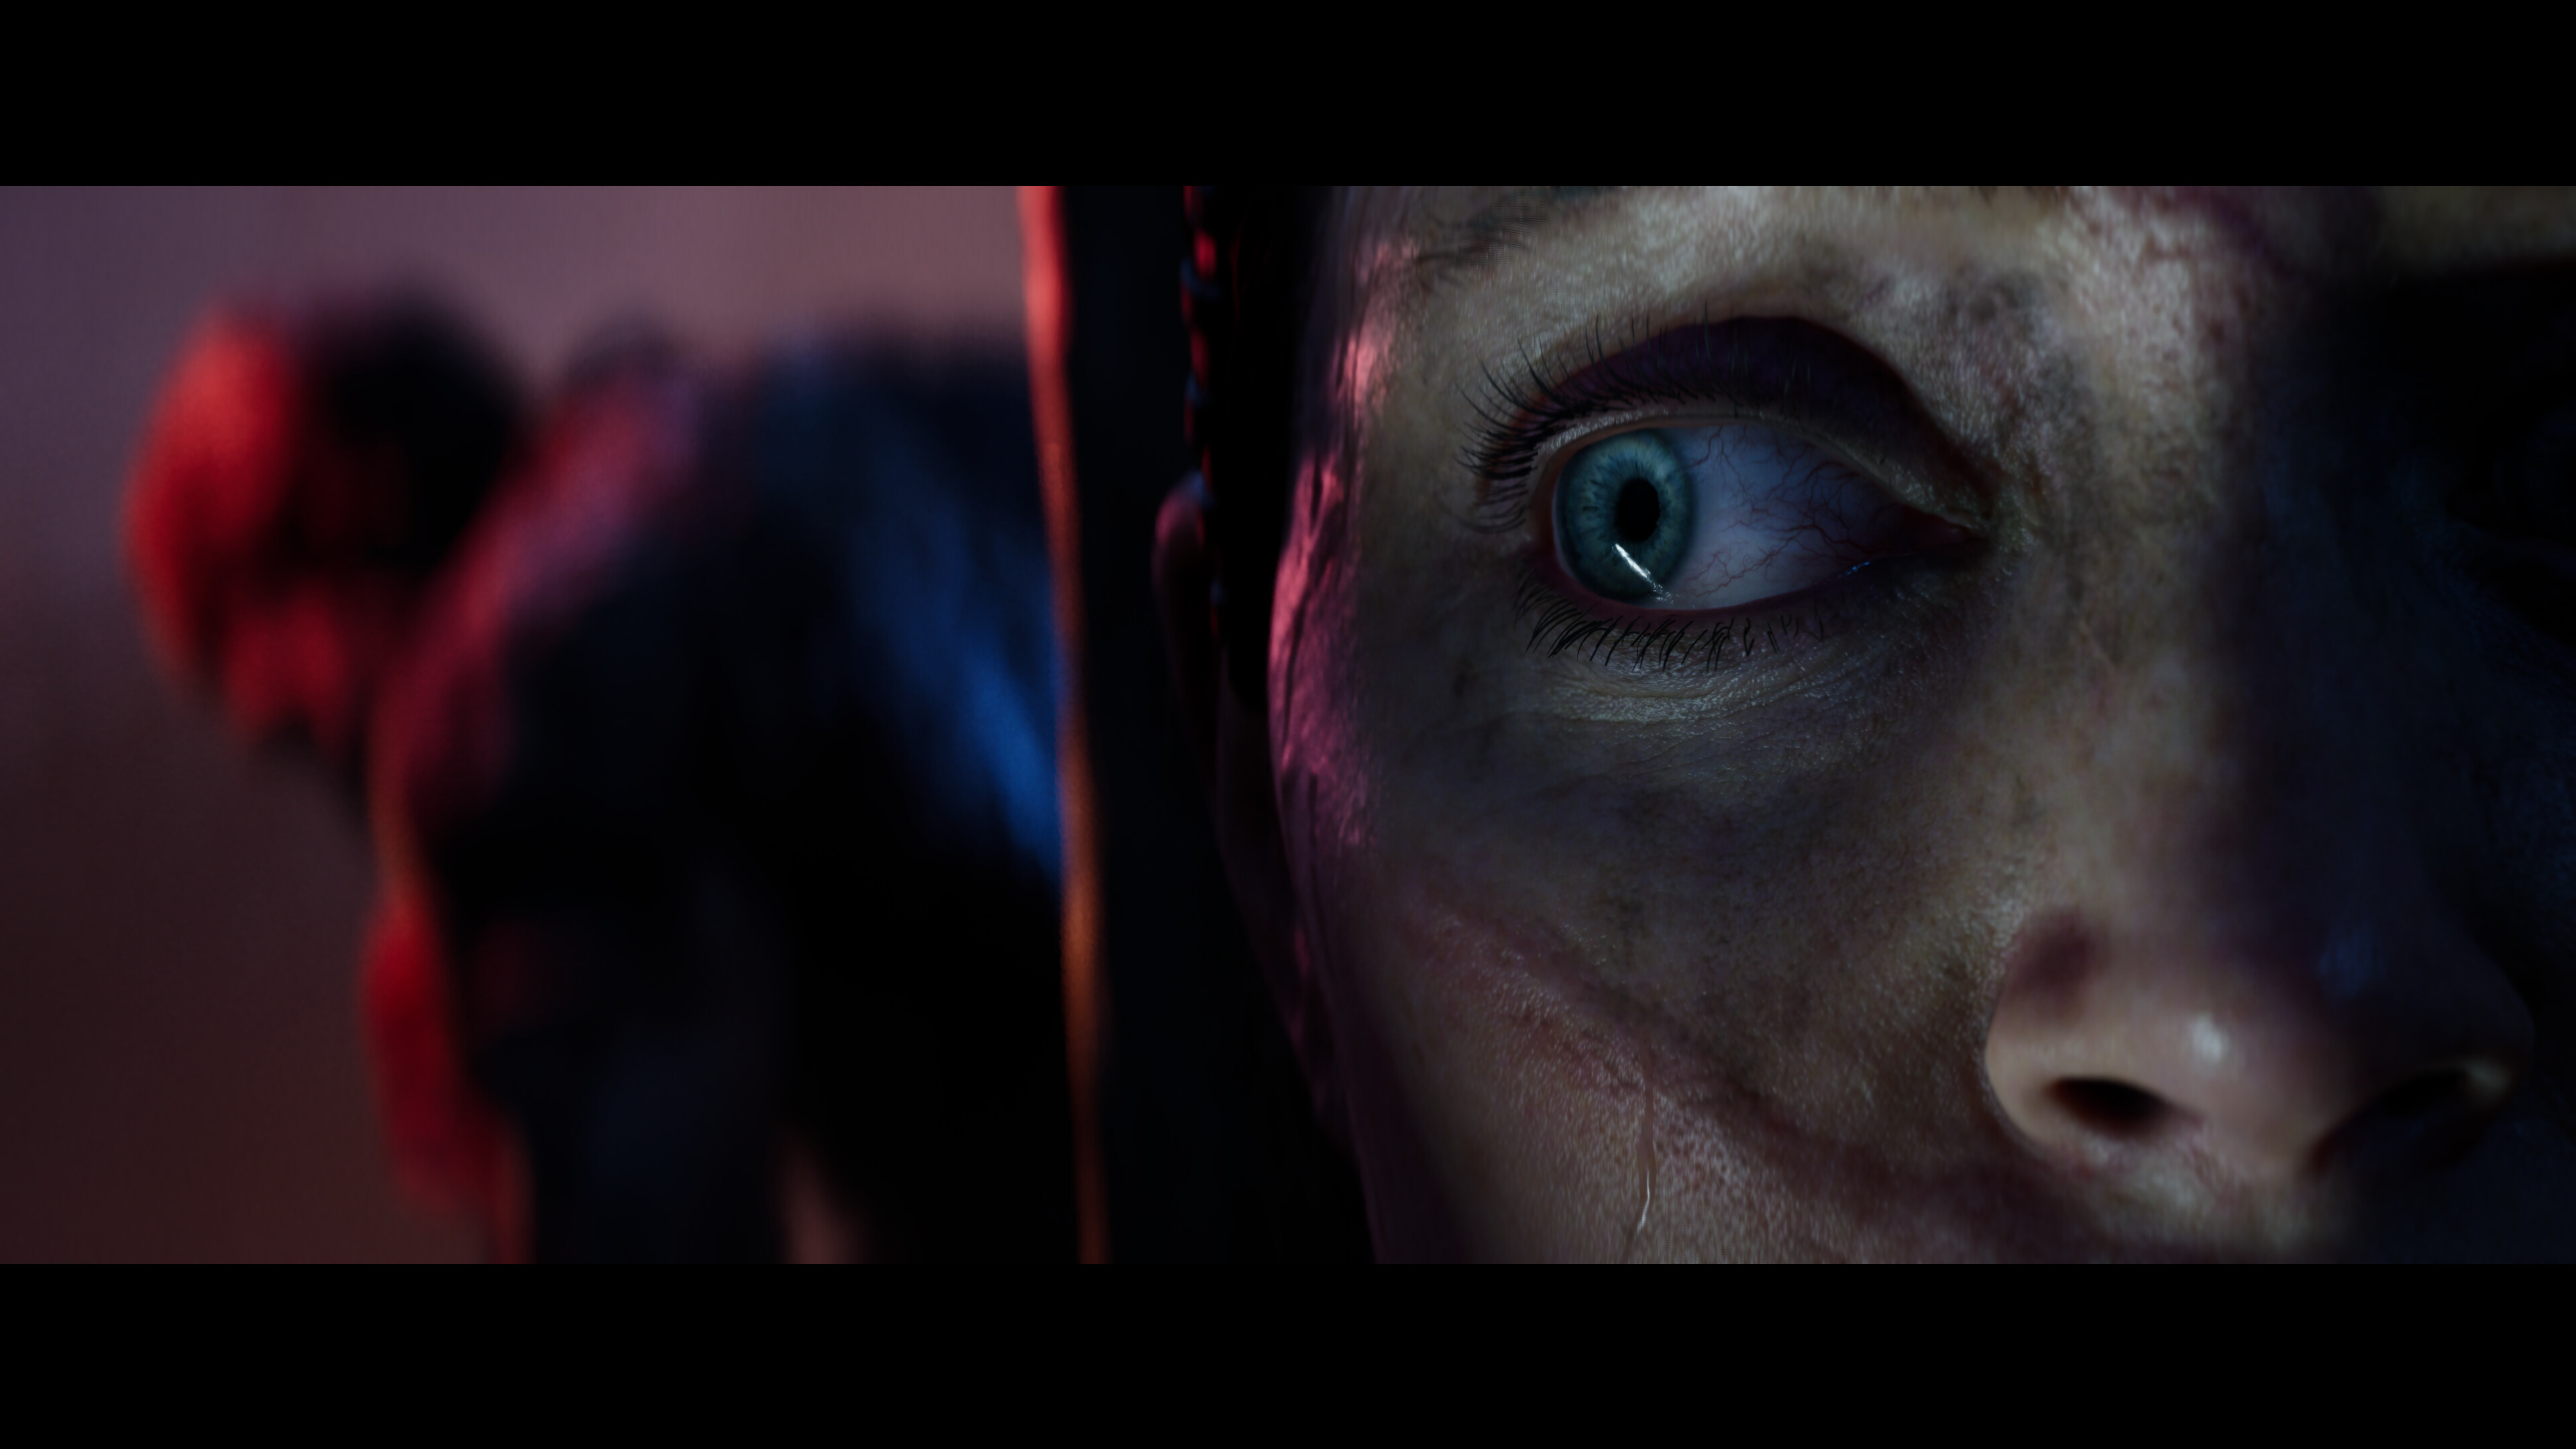 An extreme close-up of Hellblade 2’s Senua glancing to her right - in the background is another figure, out of focus